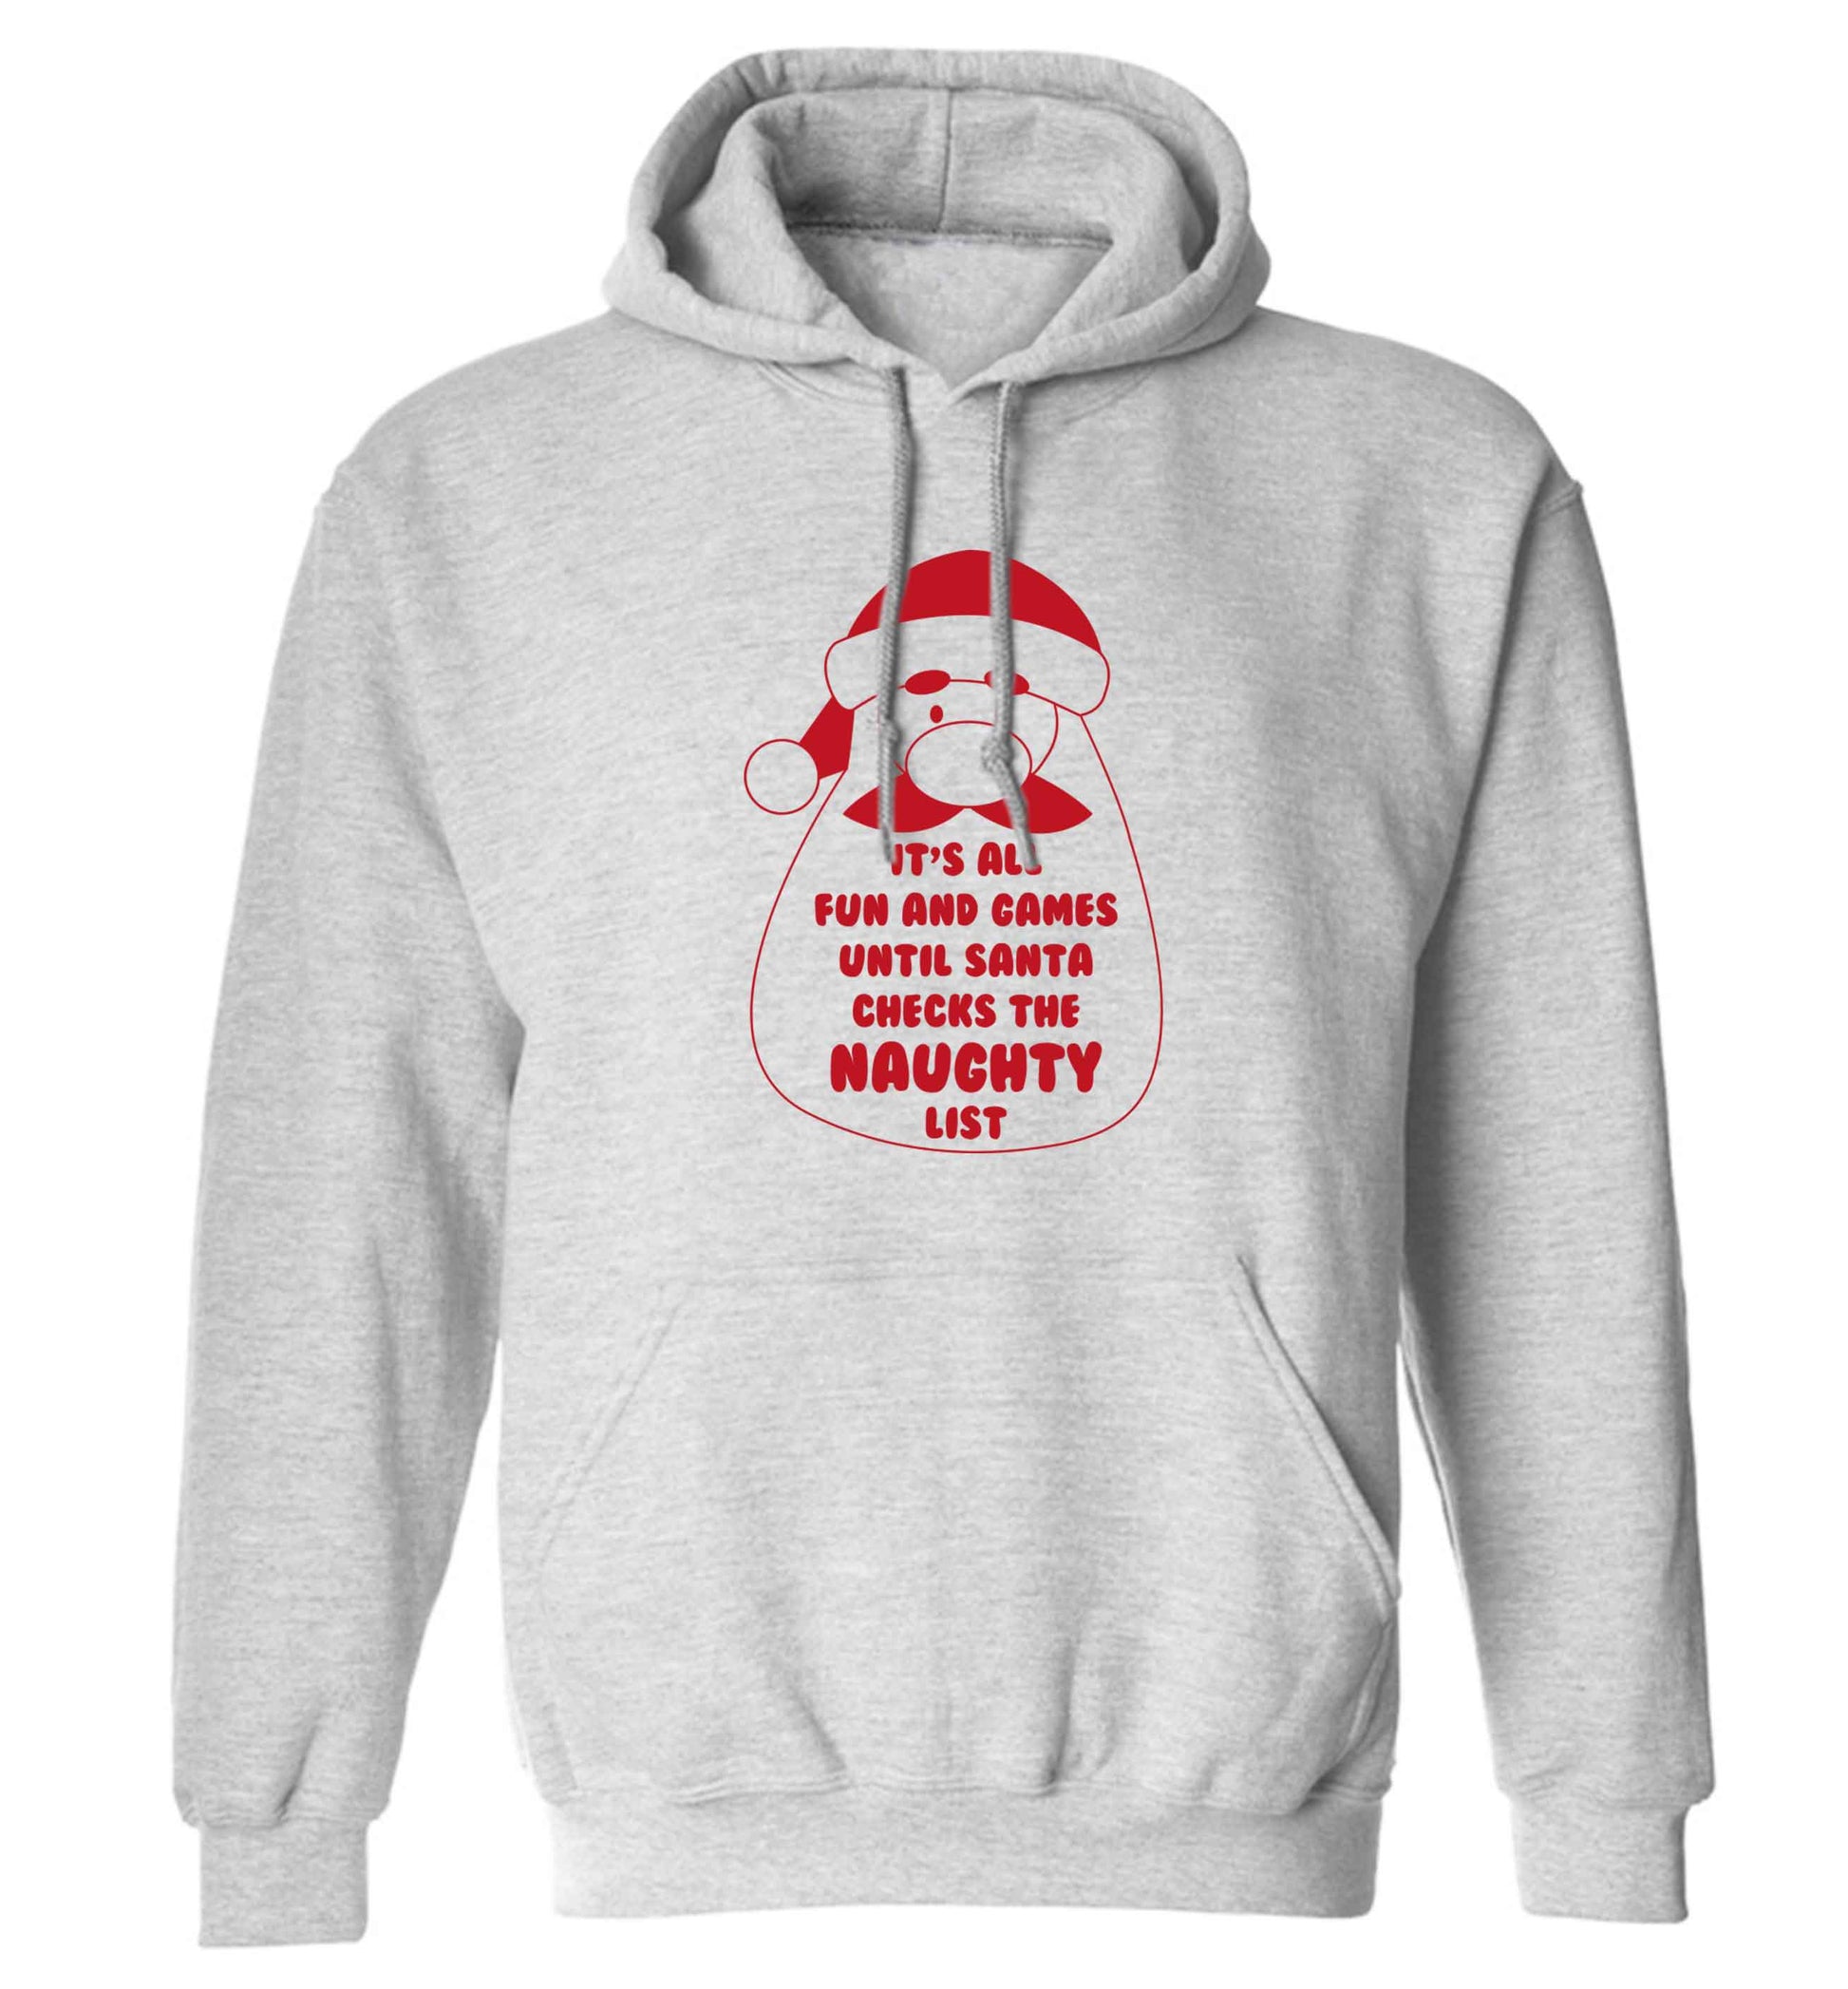 It's all fun and games until Santa checks the naughty list adults unisex grey hoodie 2XL